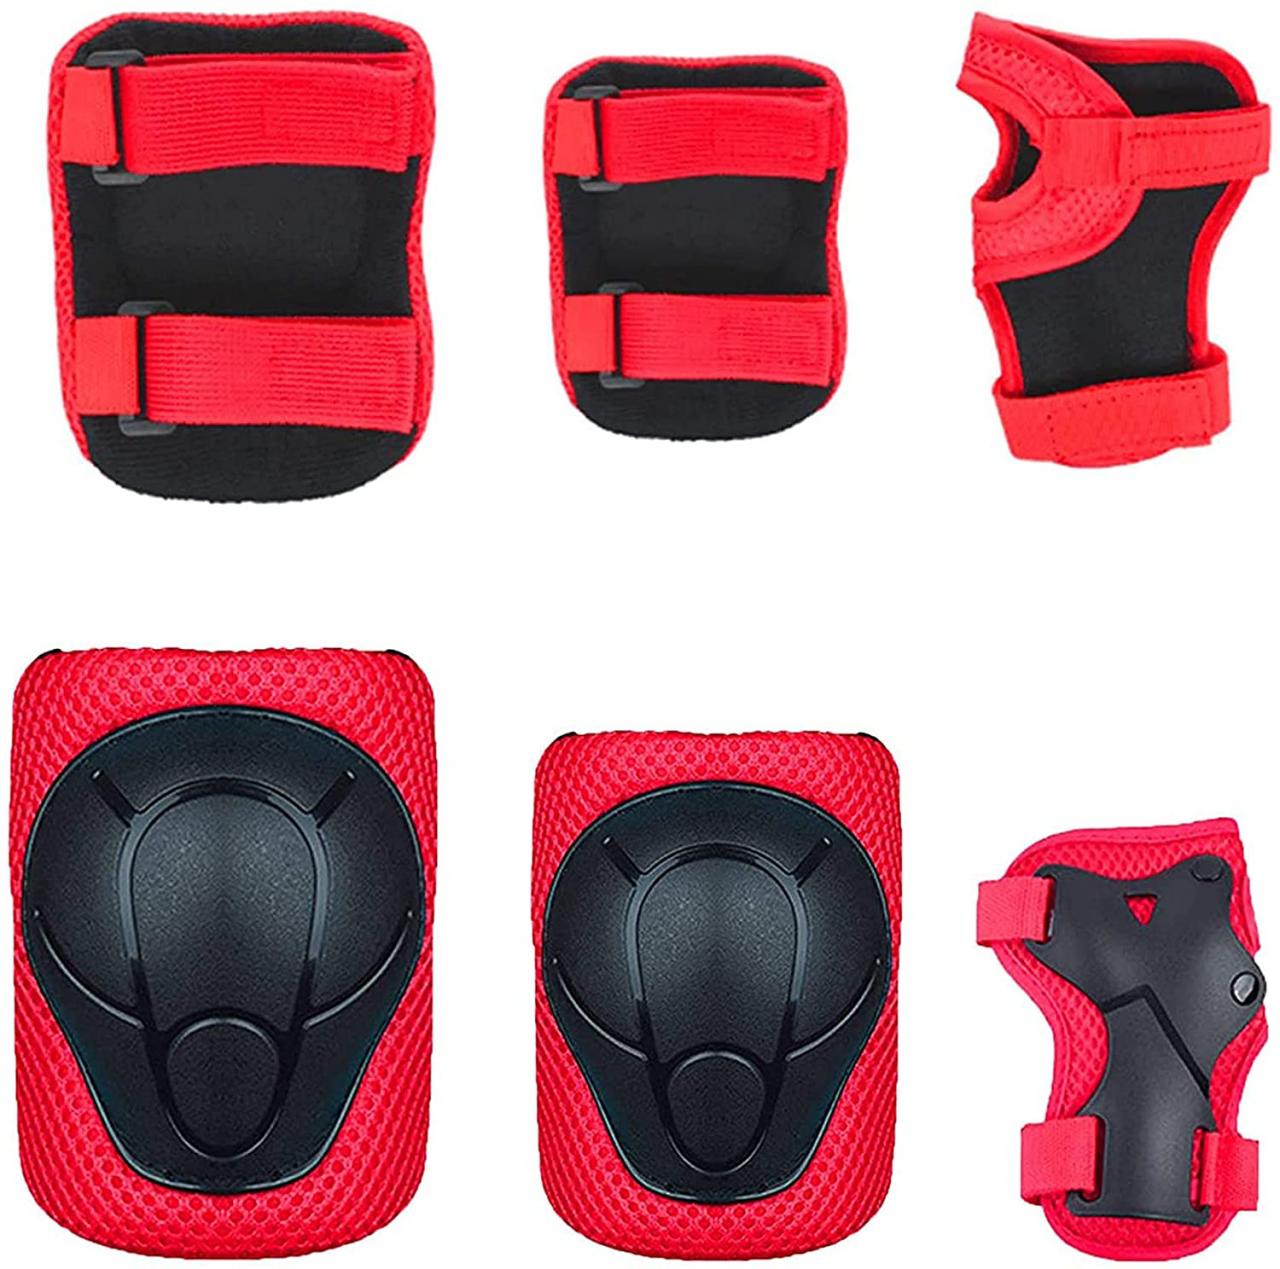 Buy Kids Kneepads and Elbow Pads Knee Pads for Kids Knee and Elbow Pads  Skateboard Knee Pads and Elbow Pads for Kids 3-10 Kids Knee Pads Set - 6  Pcs Bike Protective